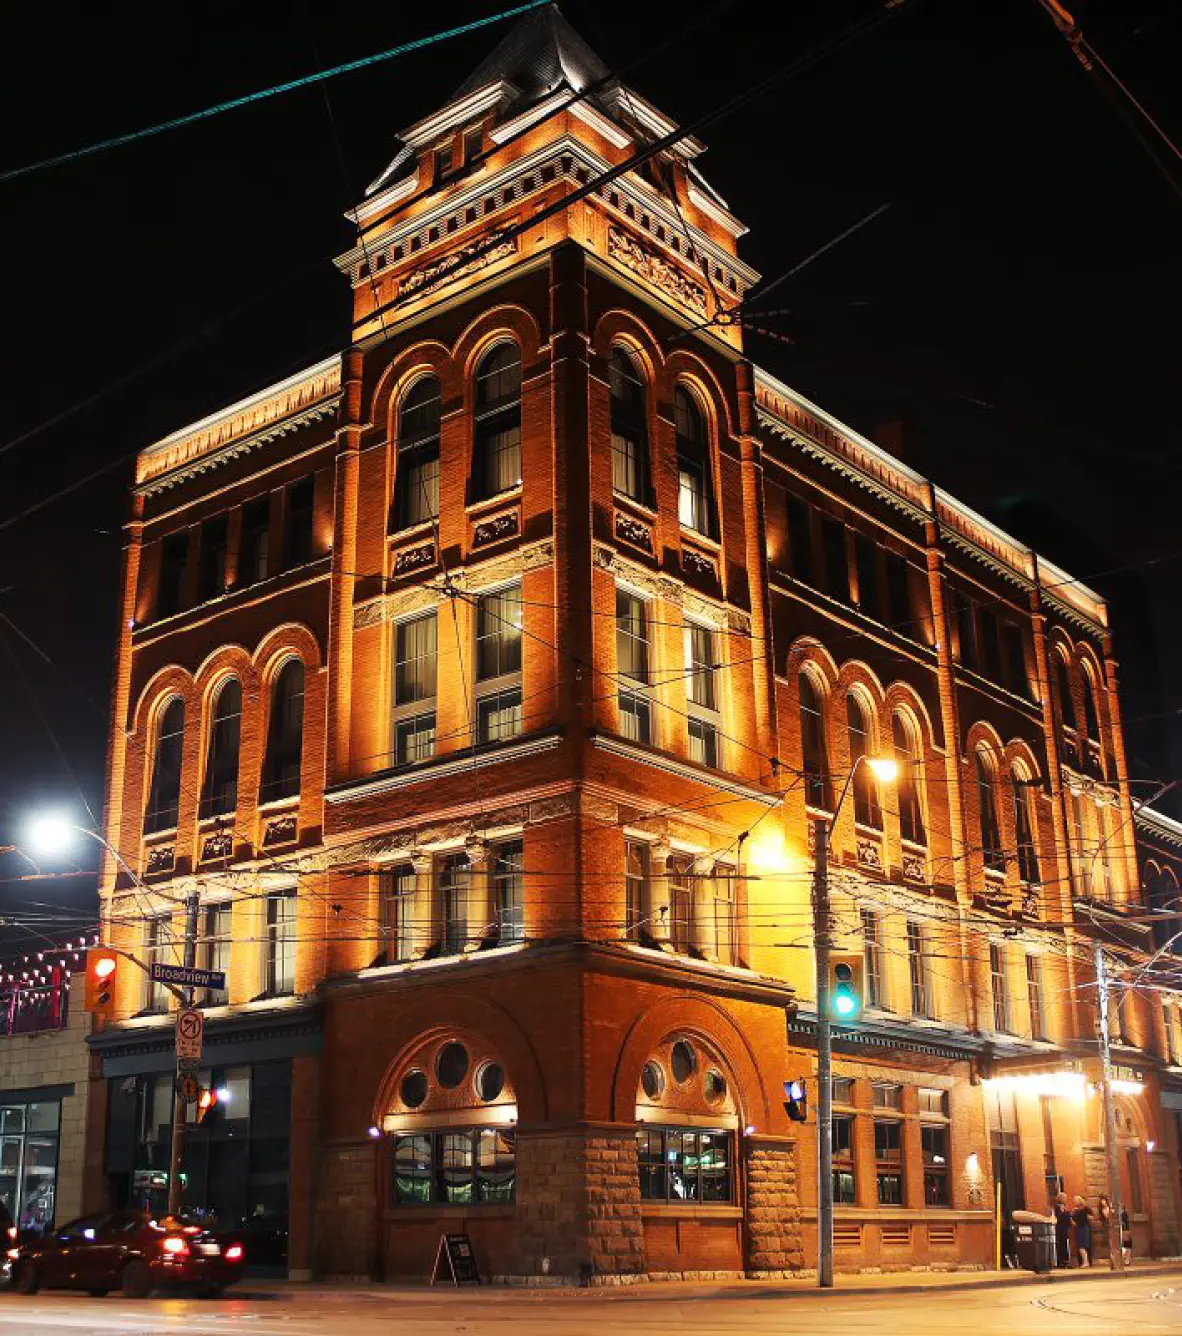 The Broadview Hotel building exterior at night with bright lighting to display the building prominently